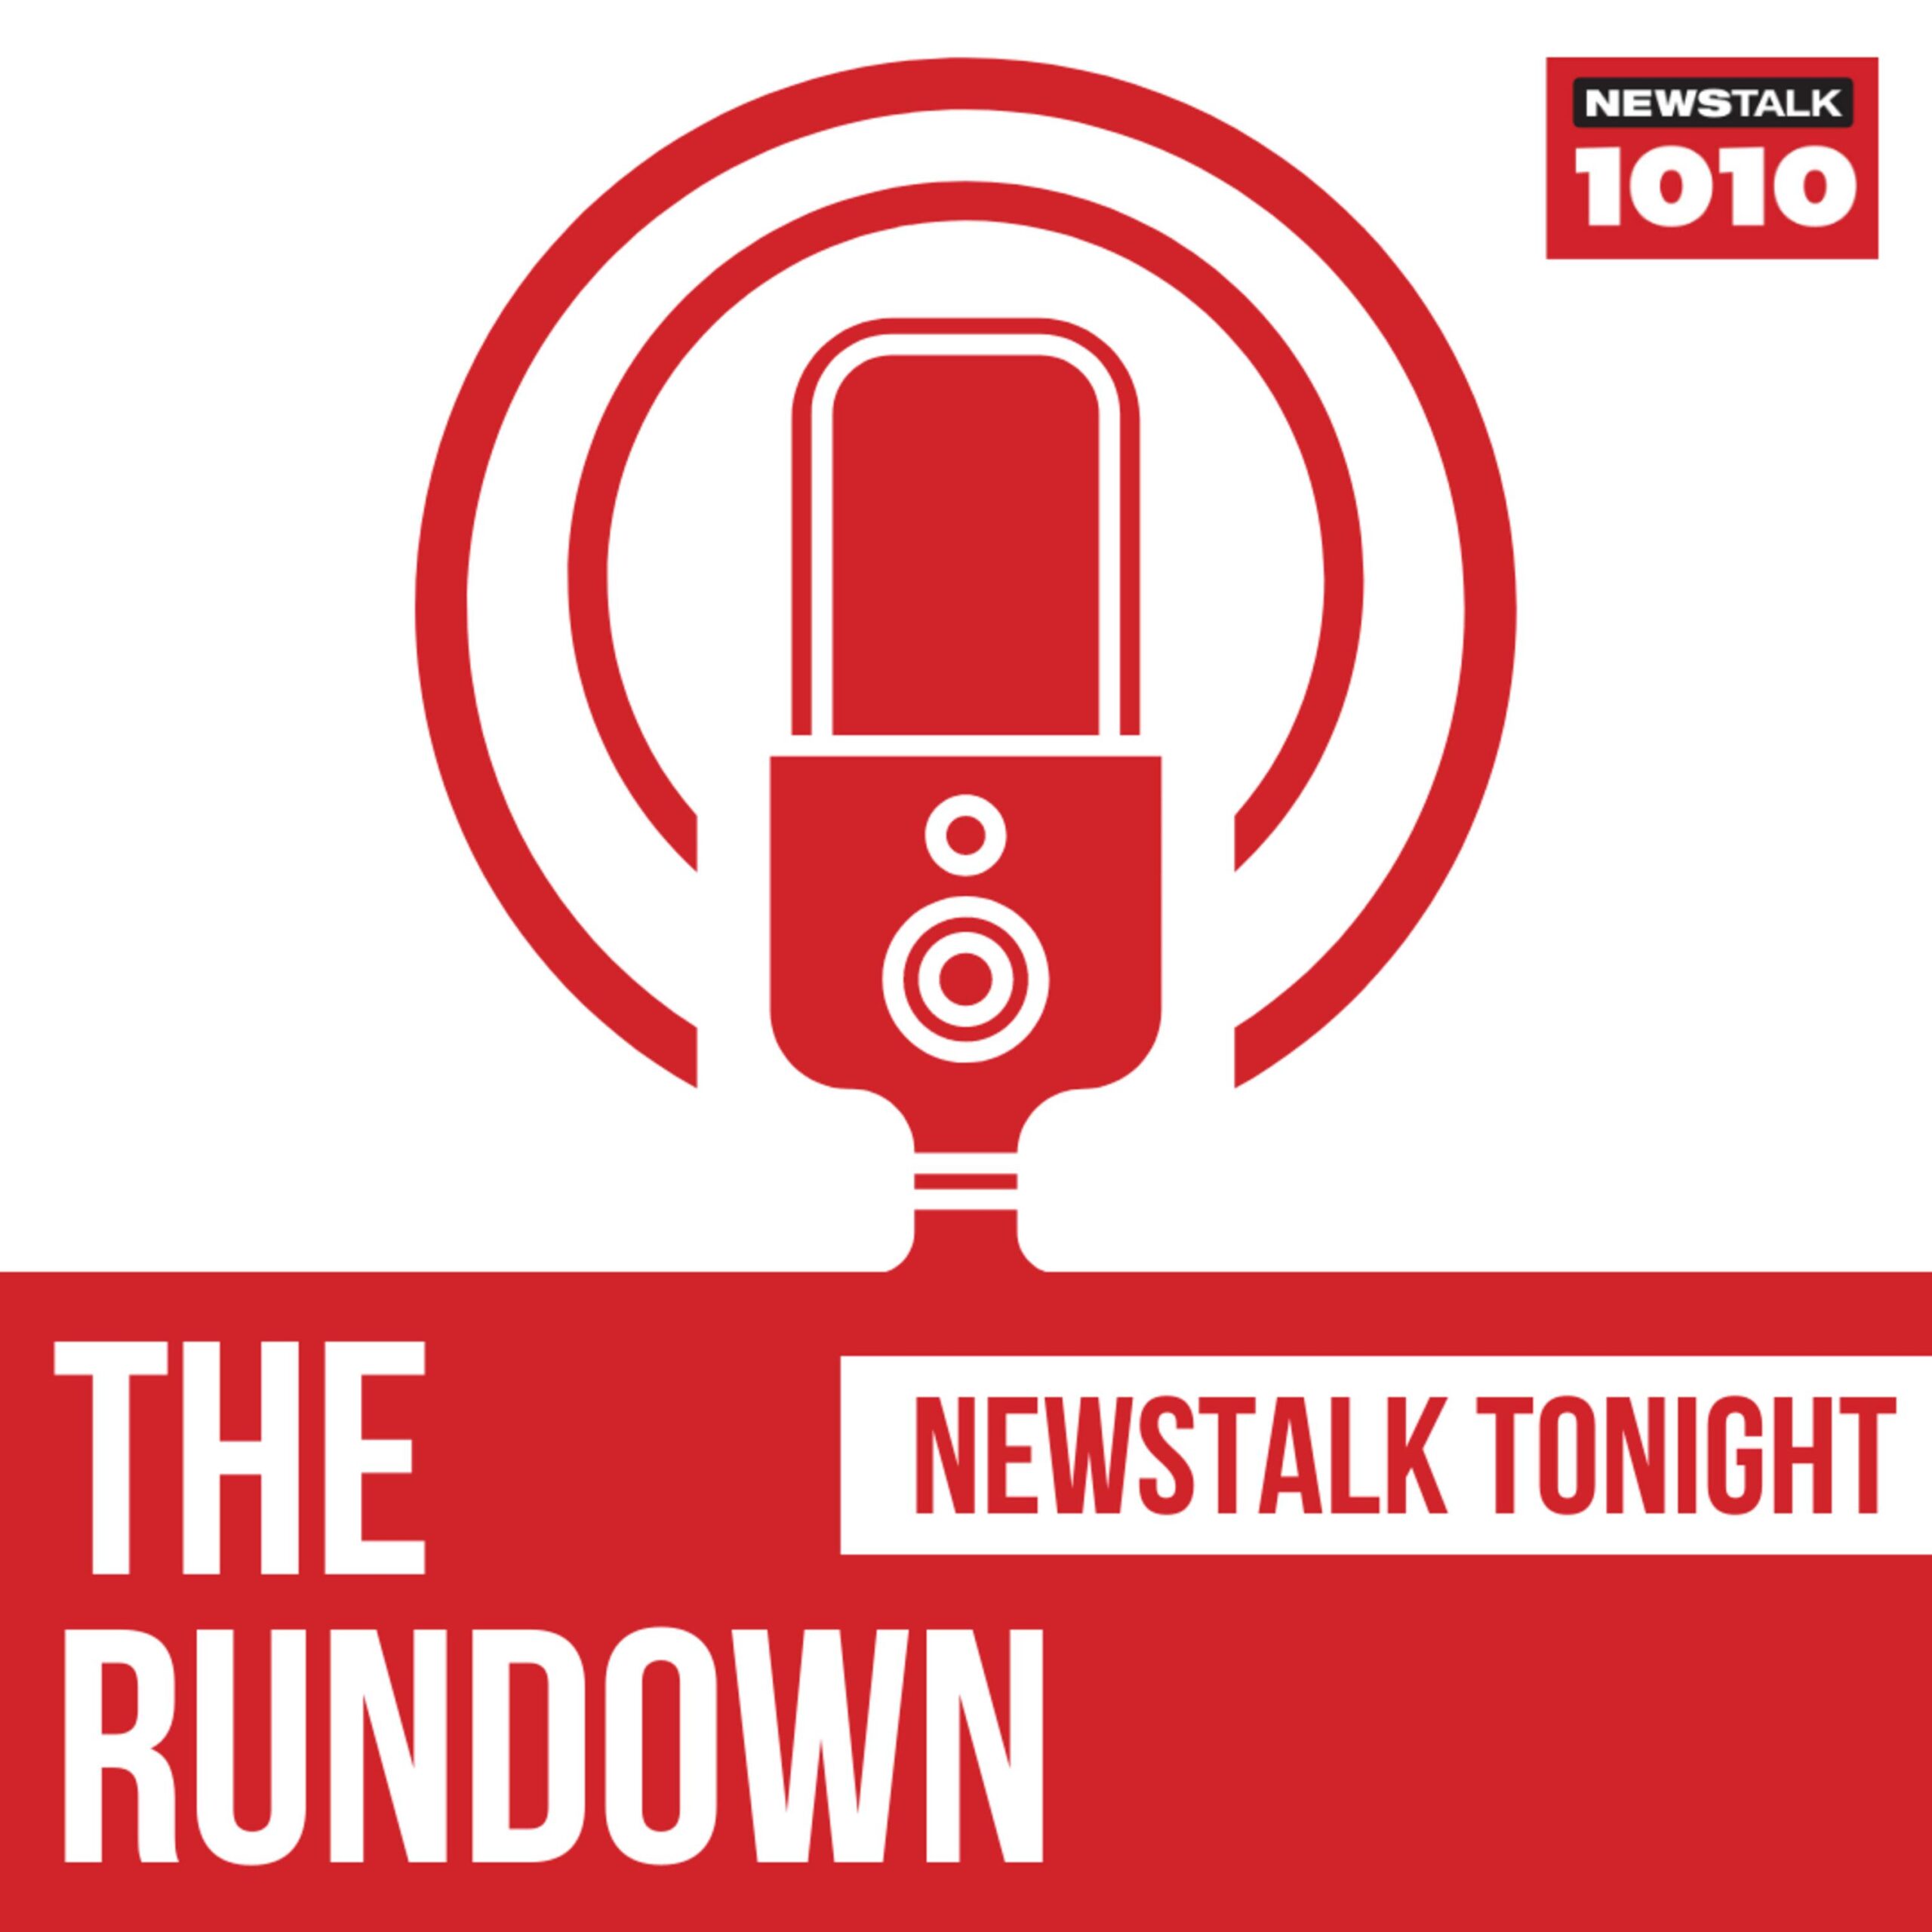 CFRB 1010: THE RUNDOWN with Jon Liedtke and Mark Mendelson